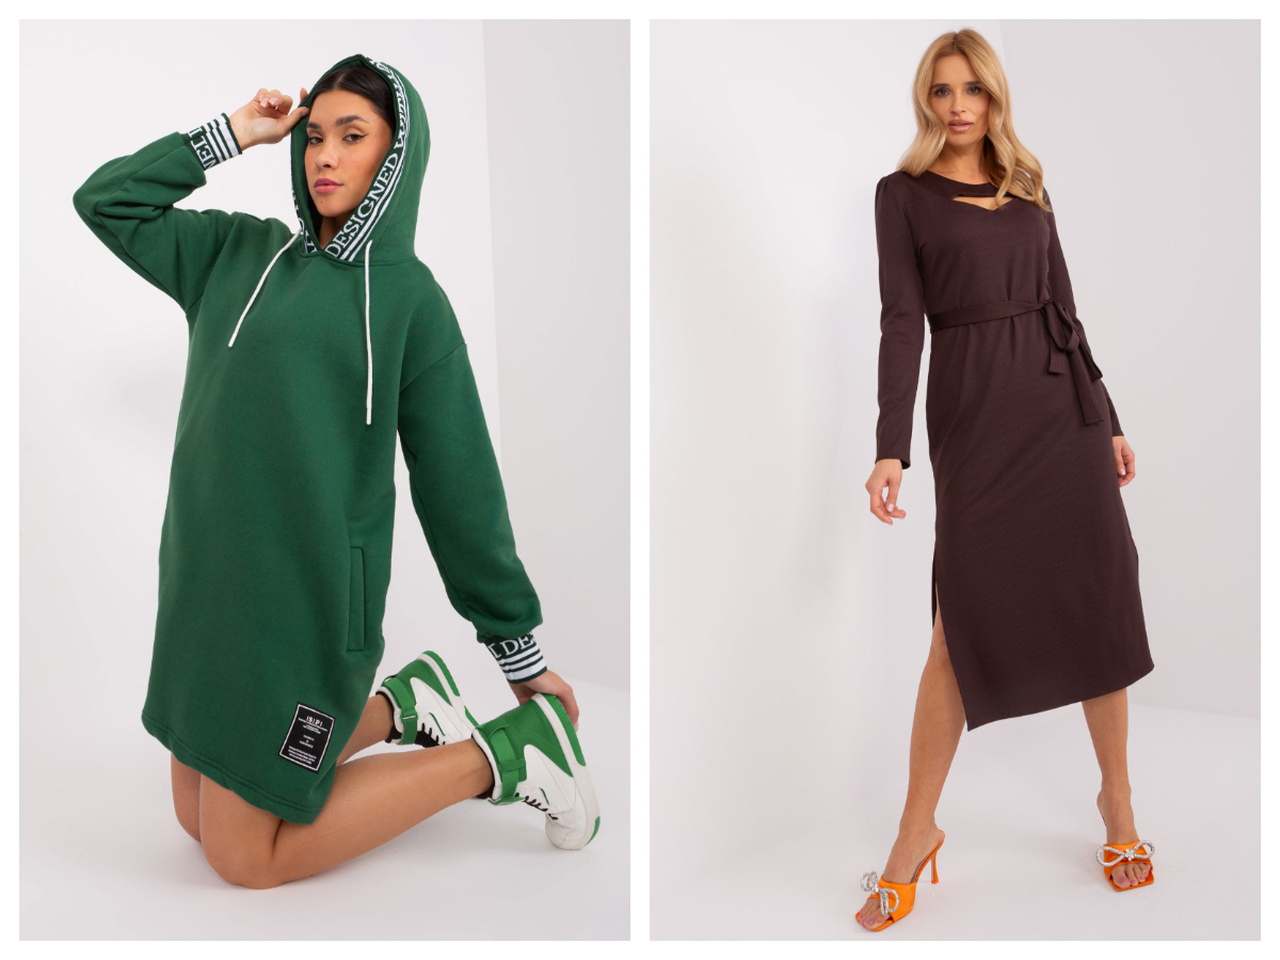 Fashionable dresses for all occasions – discover the novelties of the season